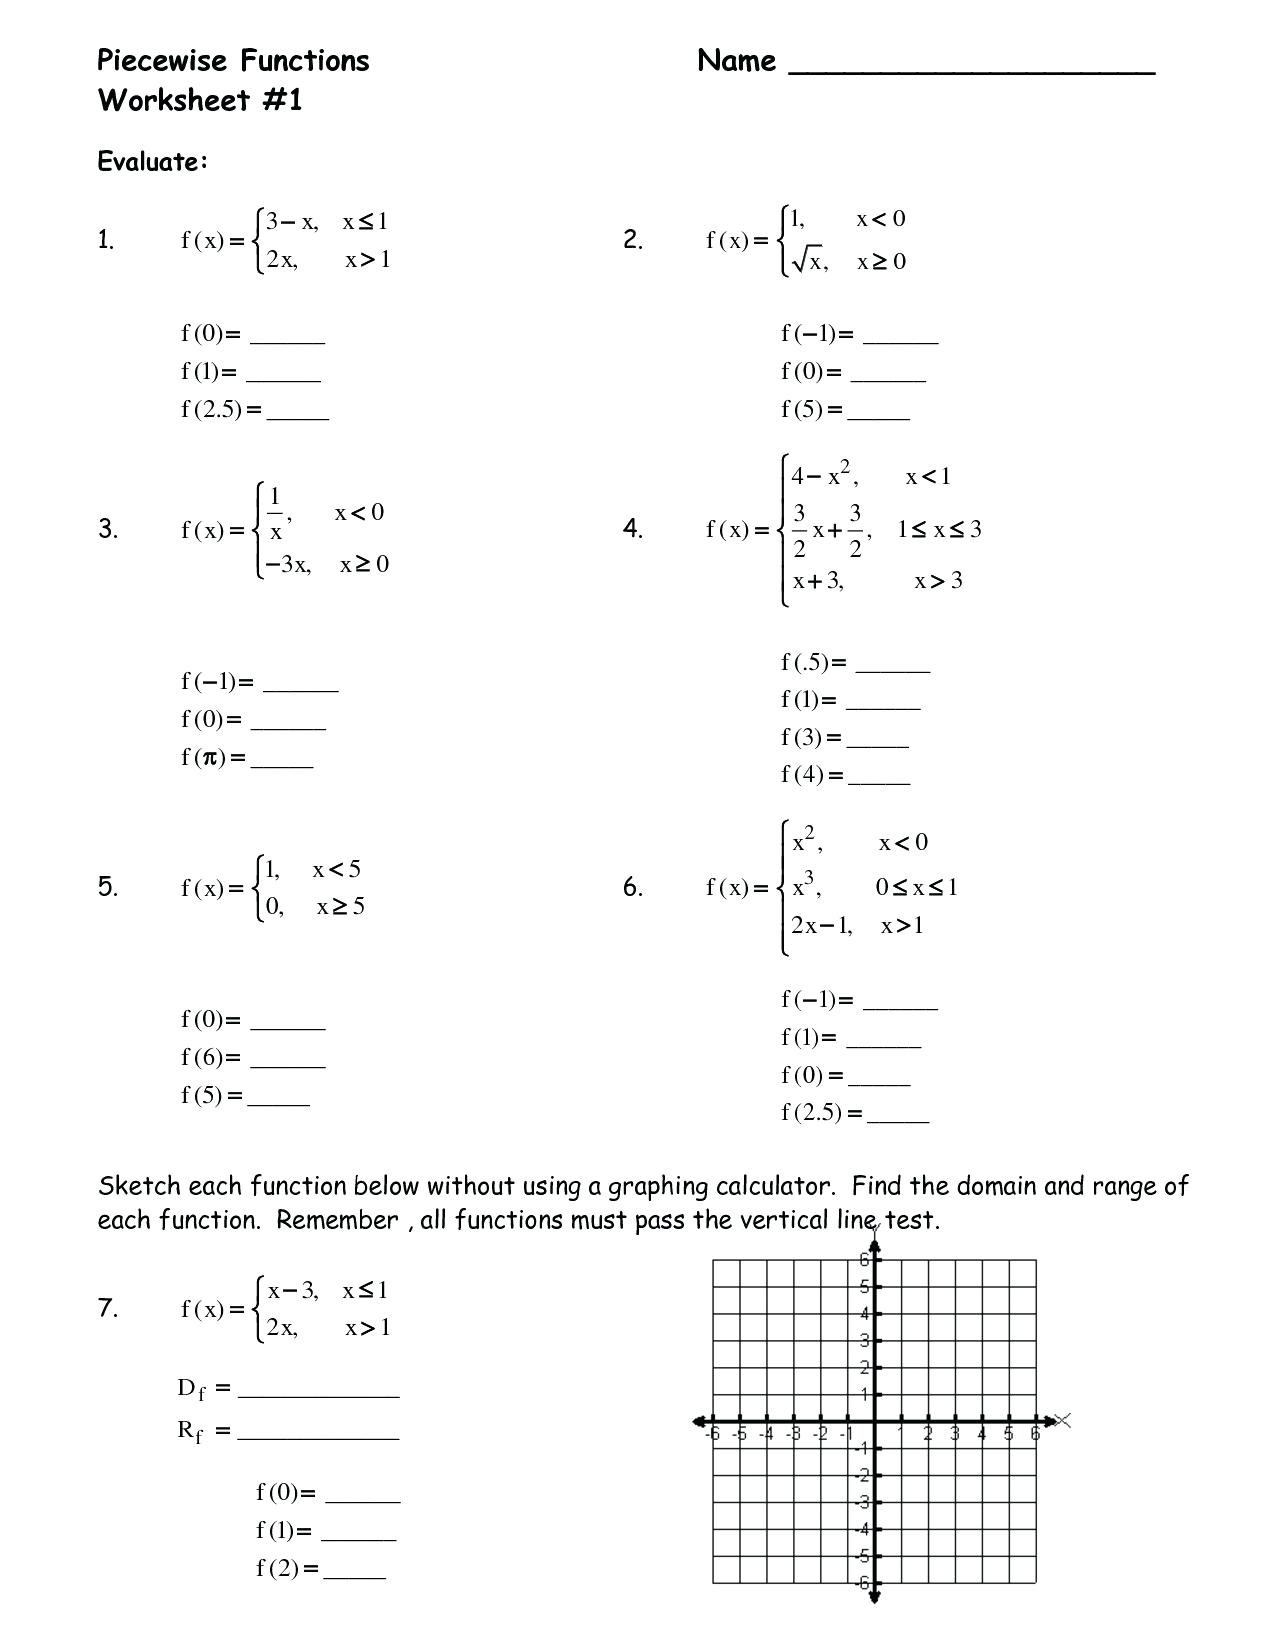 Worksheet Piecewise Functions Answer Key Worksheet Piecewise Functions Answer Key Nidecmege